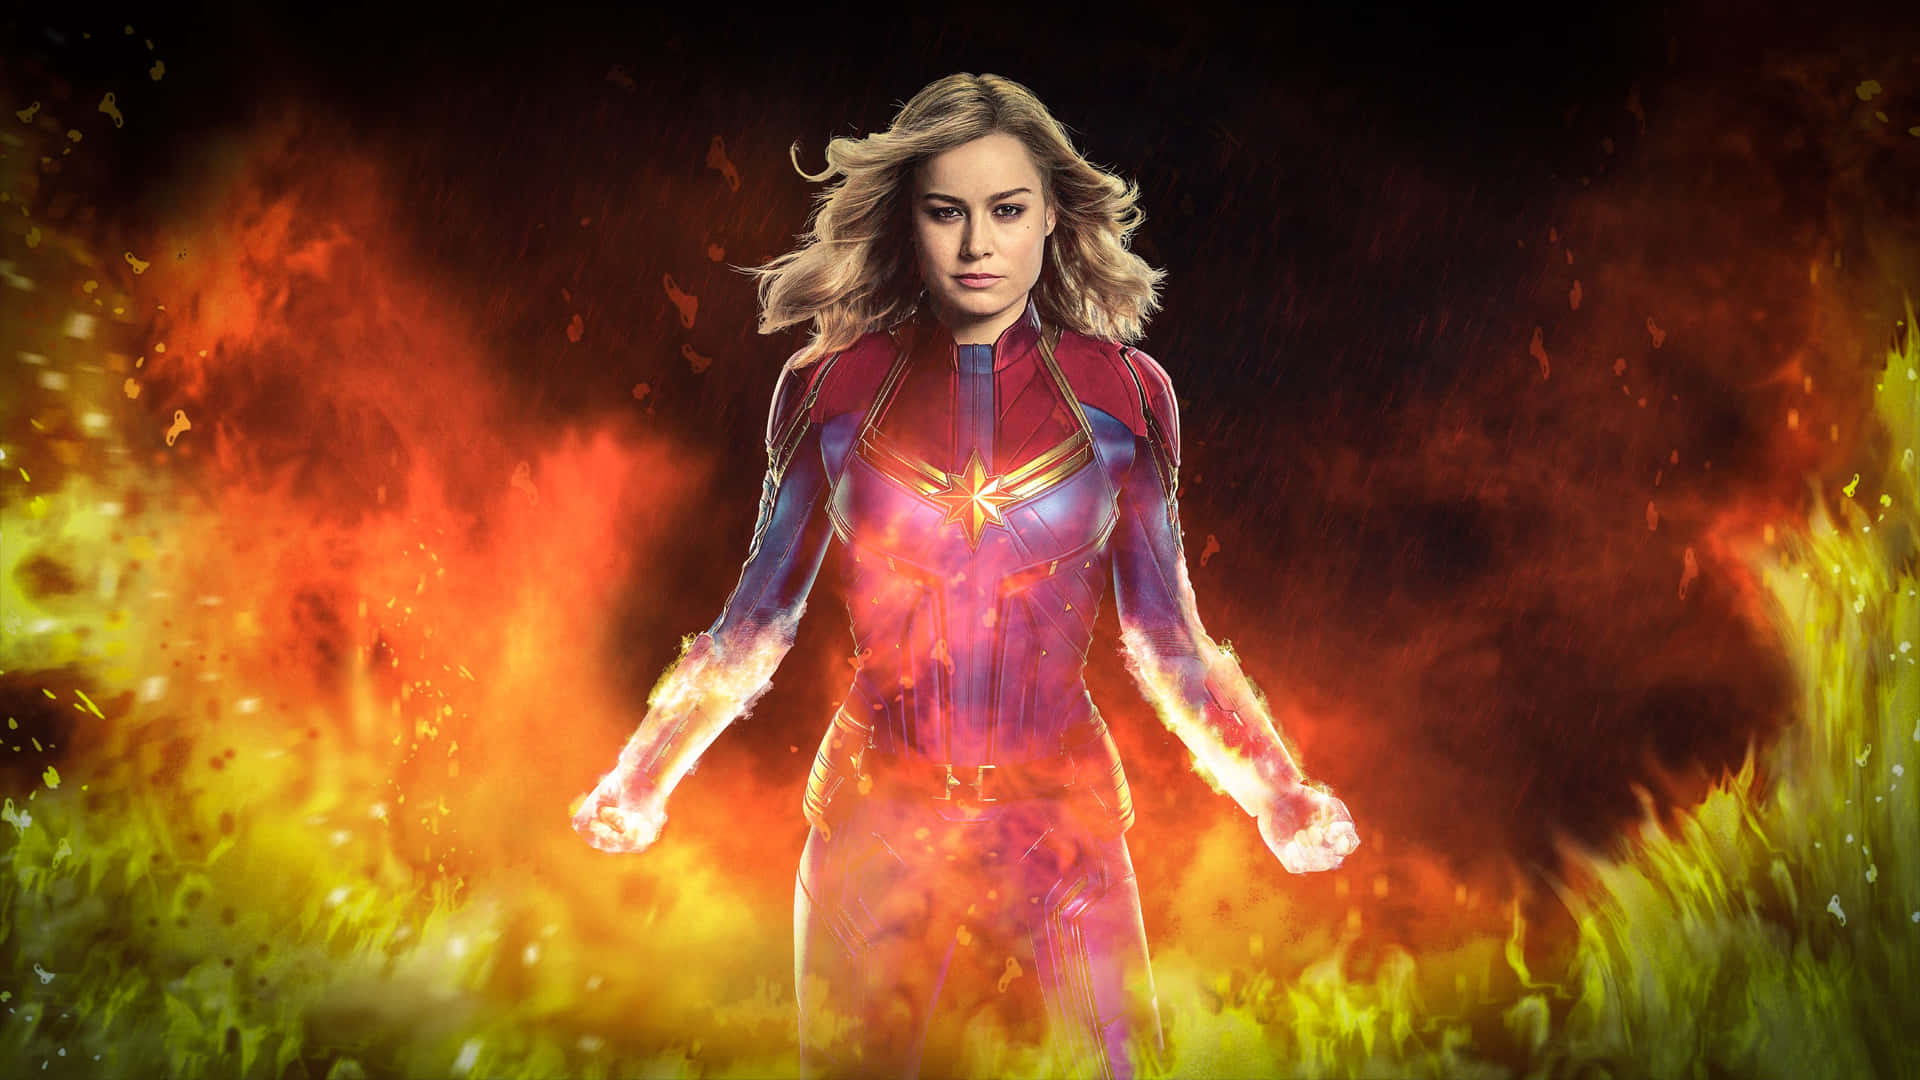 Captain Marvel is ready to take on the world! Wallpaper